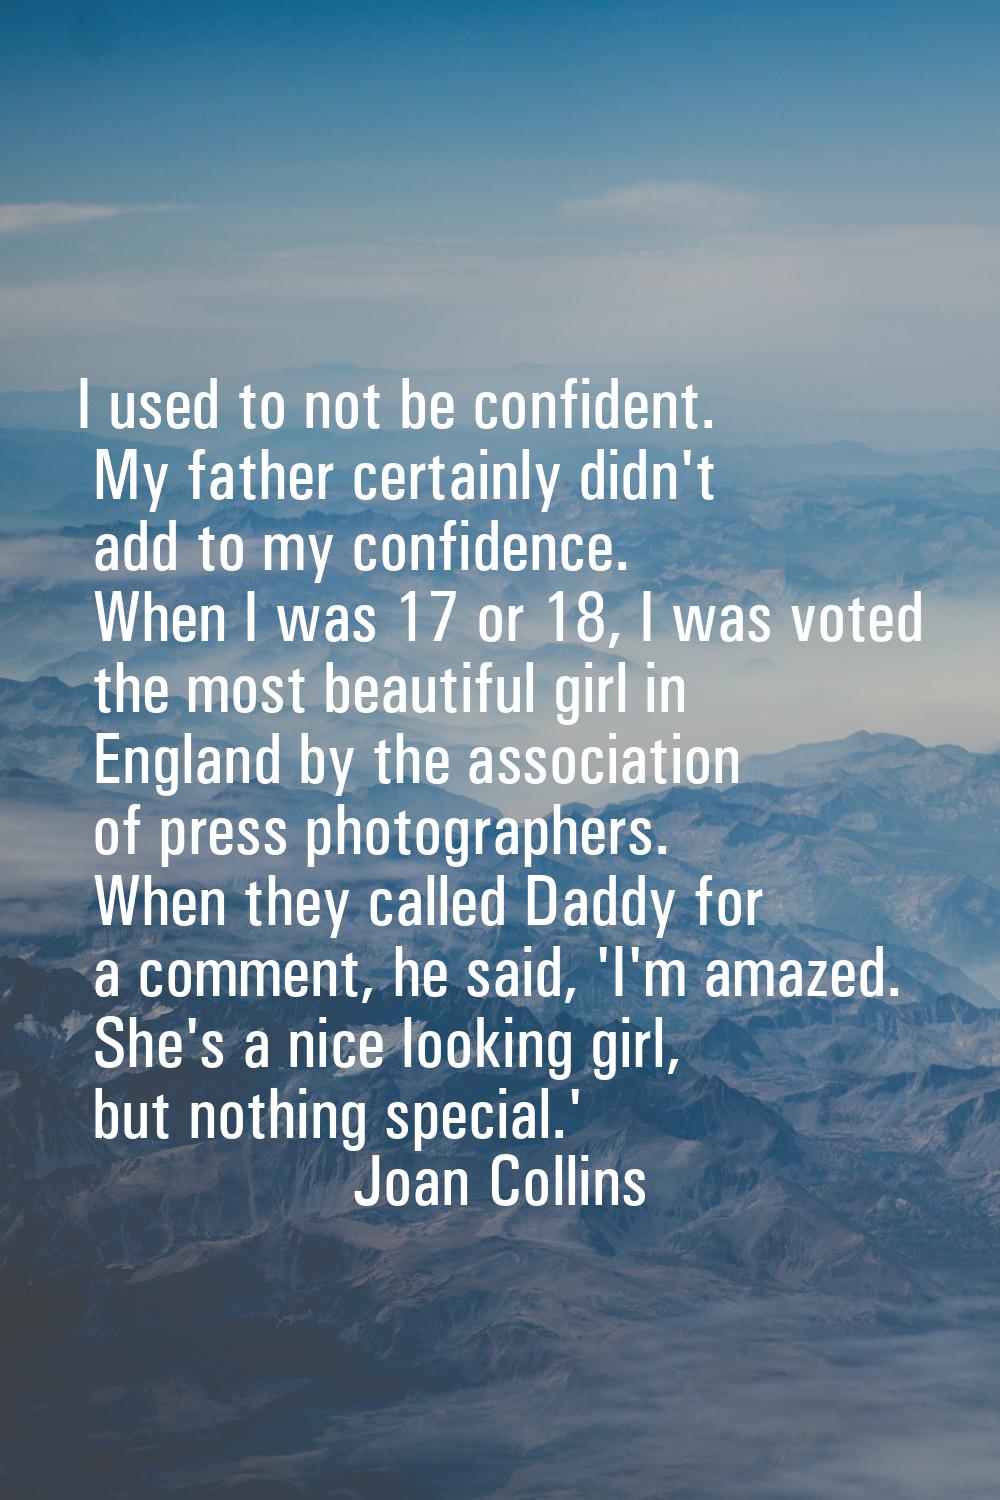 I used to not be confident. My father certainly didn't add to my confidence. When I was 17 or 18, I